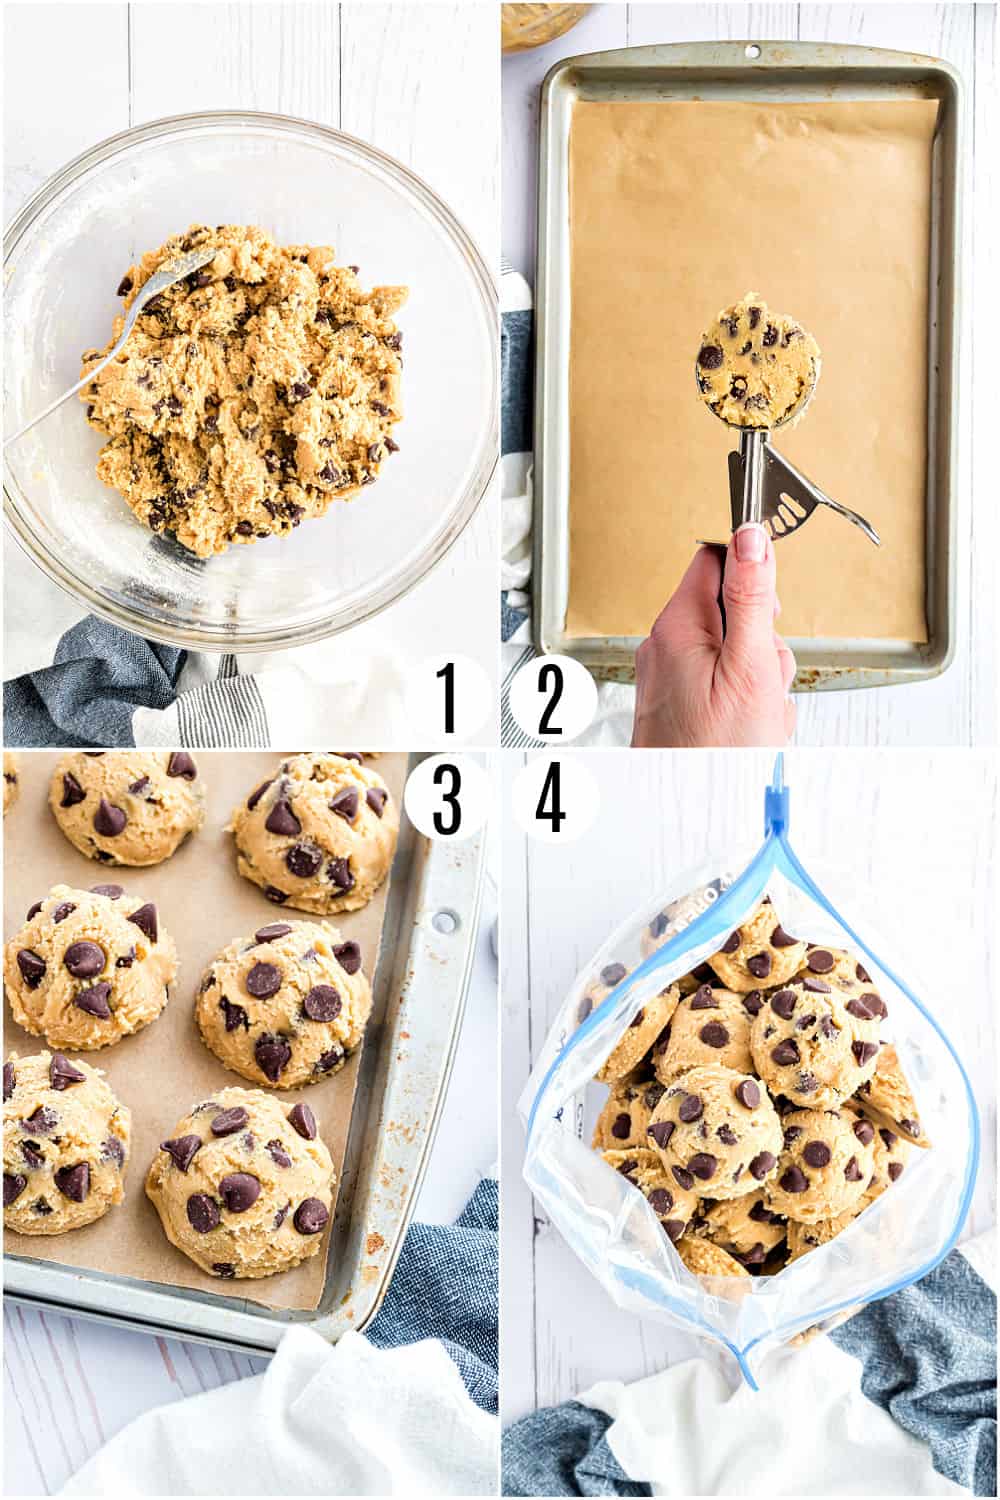 Step by step photos showing how to freeze cookie dough.